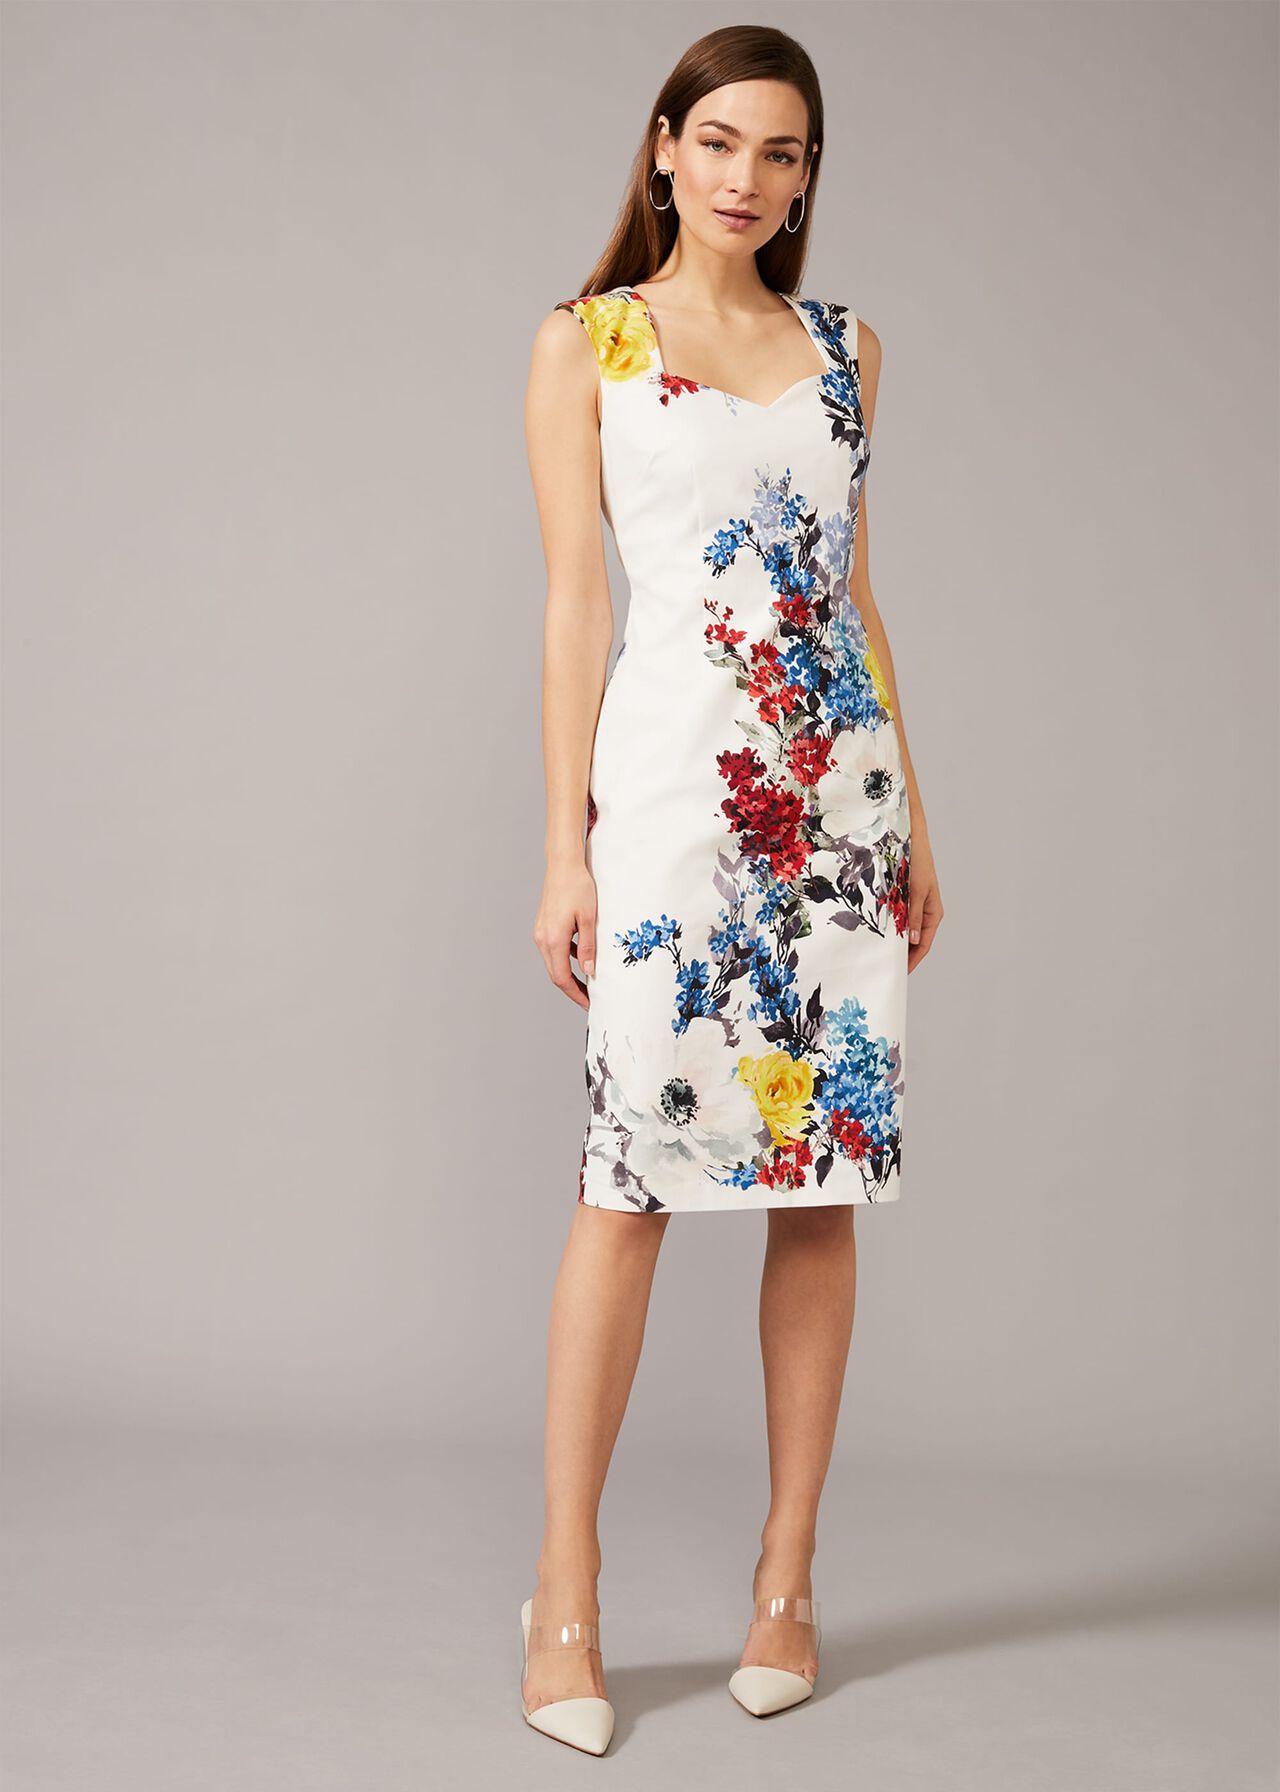 Keshena Floral Fitted Dress